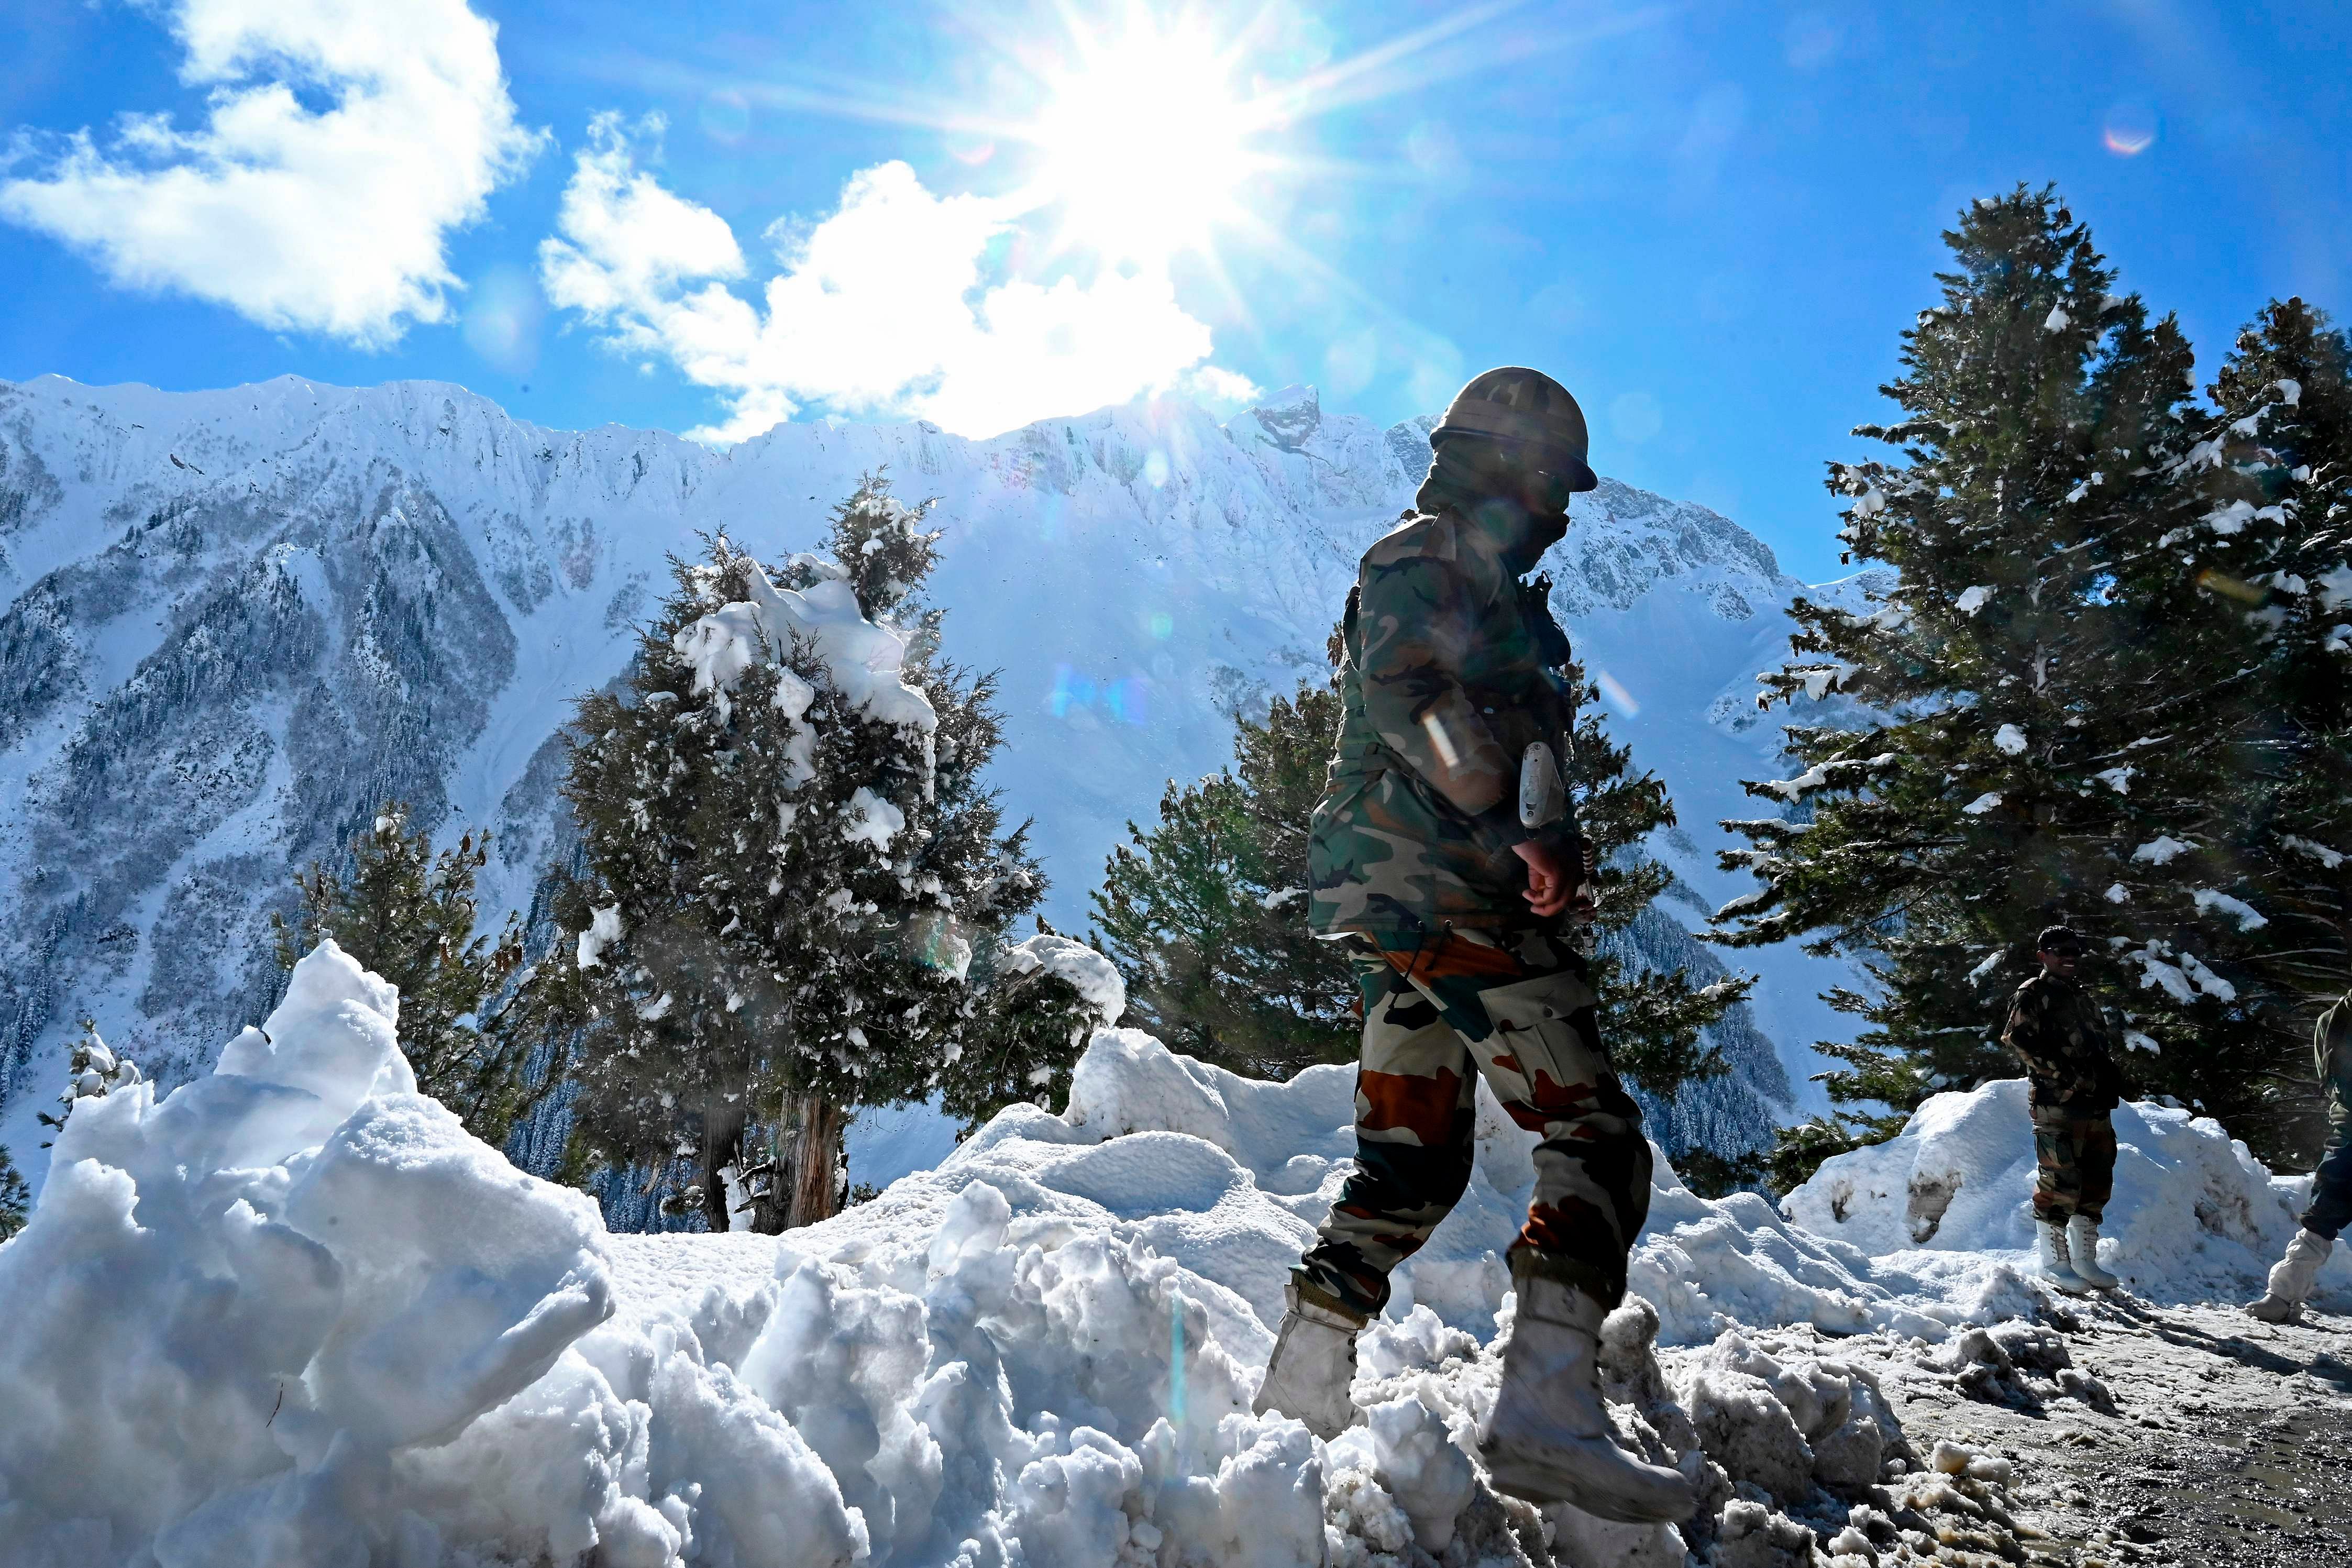 Indian army soldiers stand on a snow covered road after snowfall near Zojila mountain pass that connects Srinagar to the union territory of Ladakh. Credit: AFP Photo